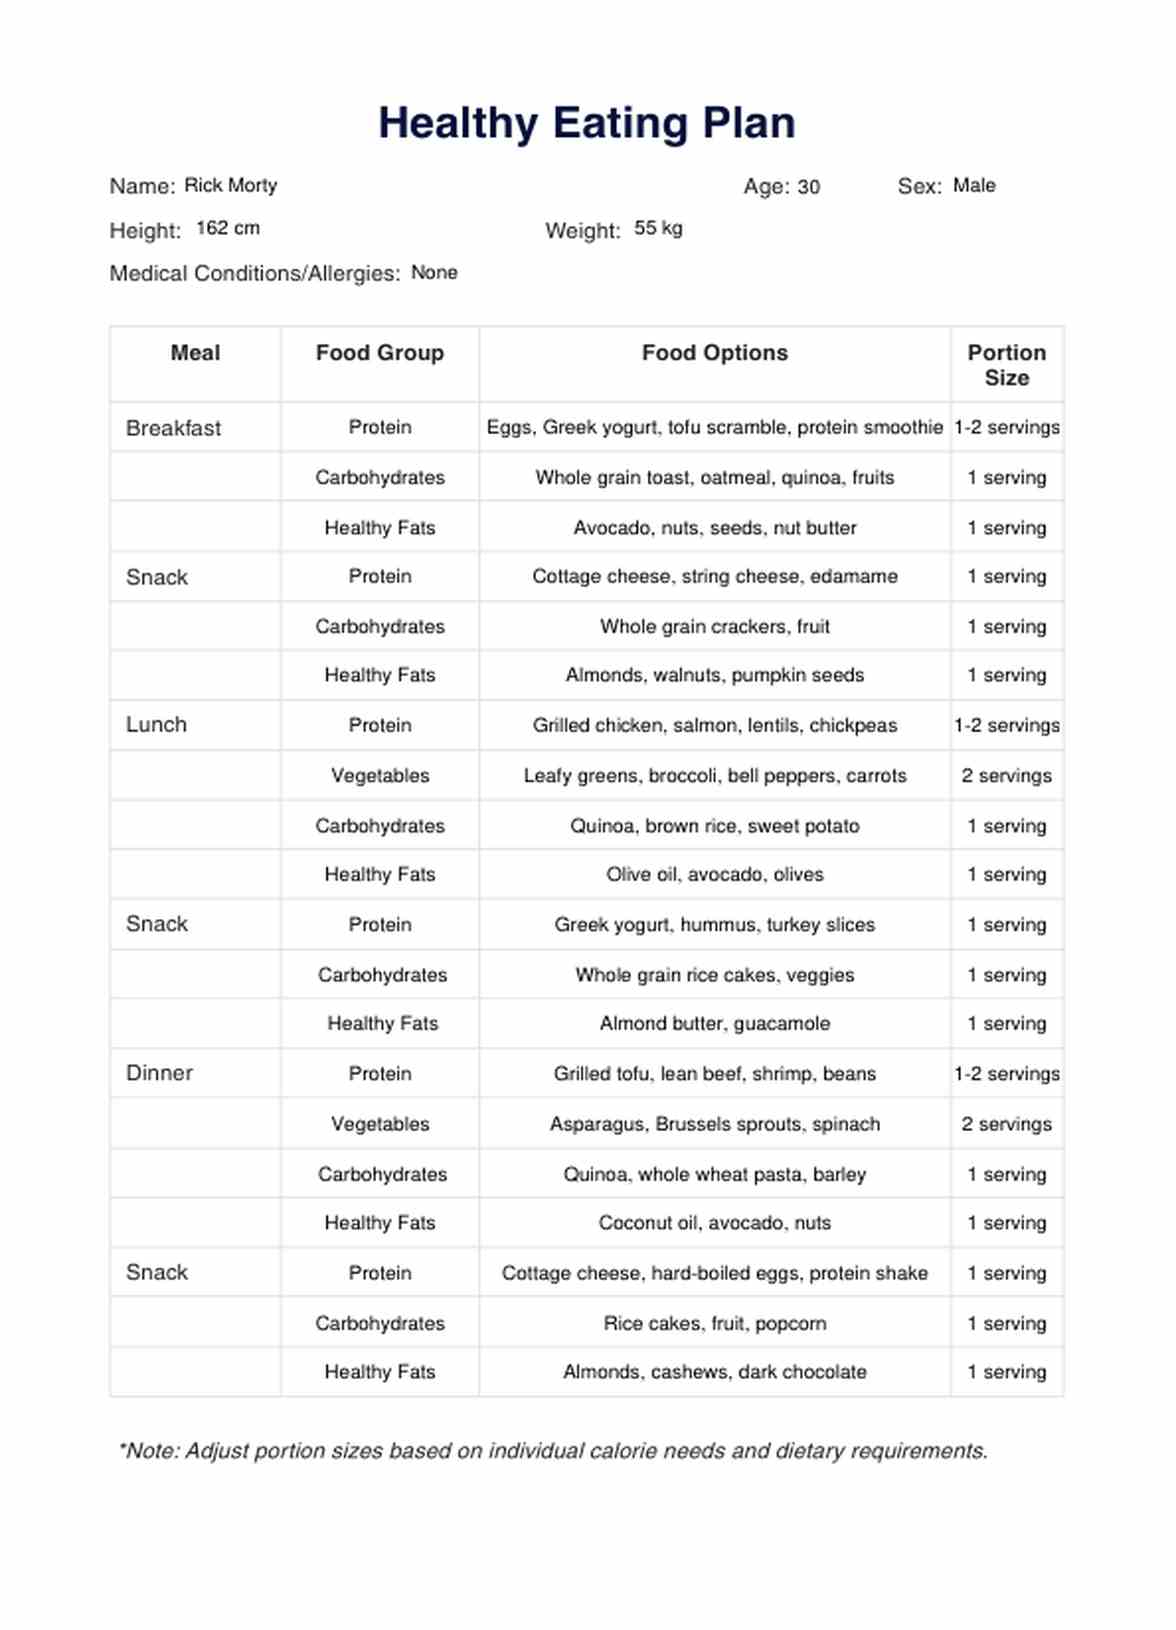 Healthy Eating Plan PDF Example